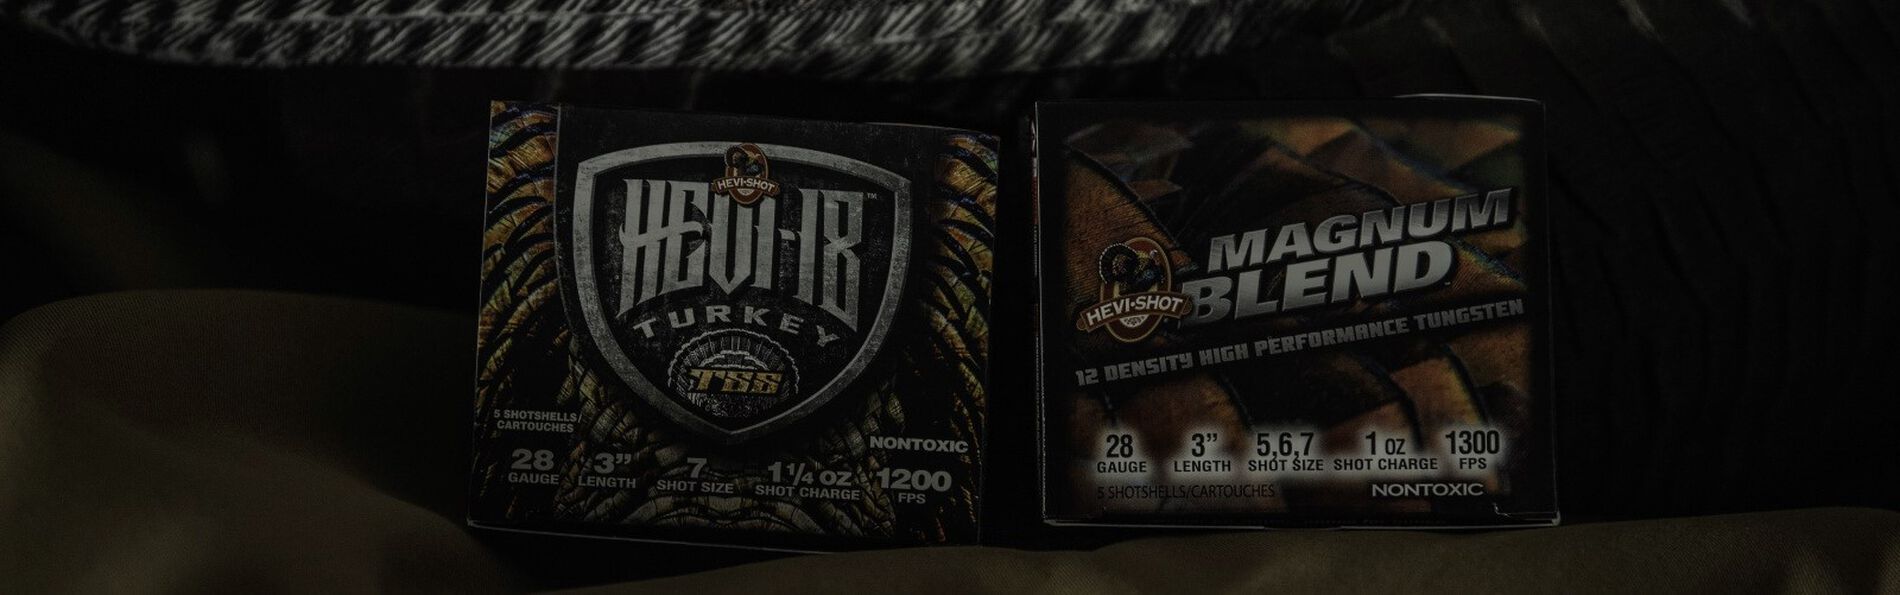 Box of HEVI-18 and Magnum Blend next to a dead turkey